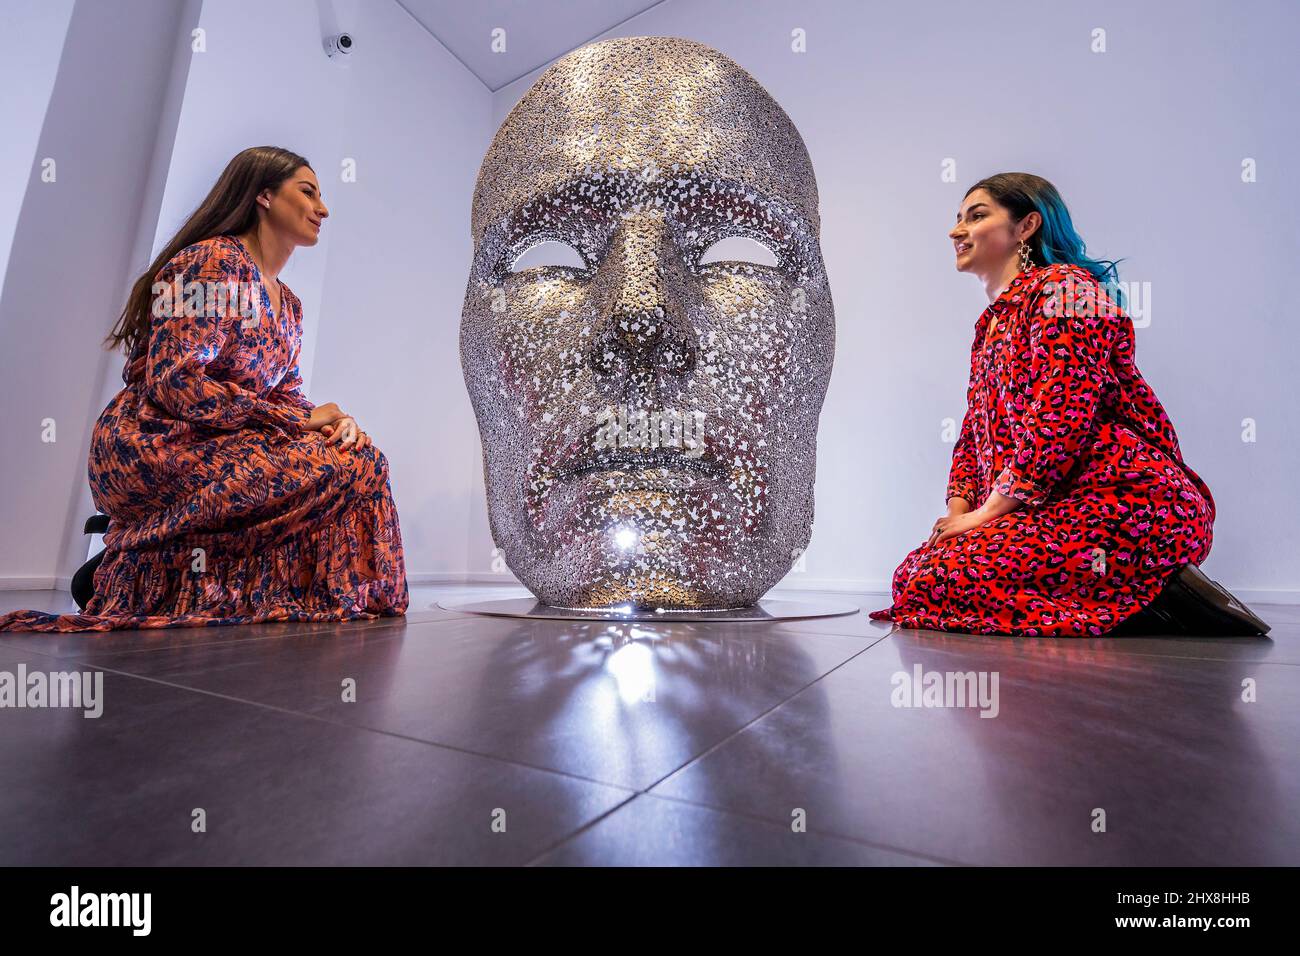 London, UK. 10th Mar, 2022. Korean Art - Cultivating the Unexpected, a group show tat Opera Gallery, New Bond Street. It brings together five Korean contemporary artists: Cho Sung-Hee, Chun Kwan-Young, Jae Ko, Yoo Bong Sang and Seo Young-Deok. Credit: Guy Bell/Alamy Live News Stock Photo